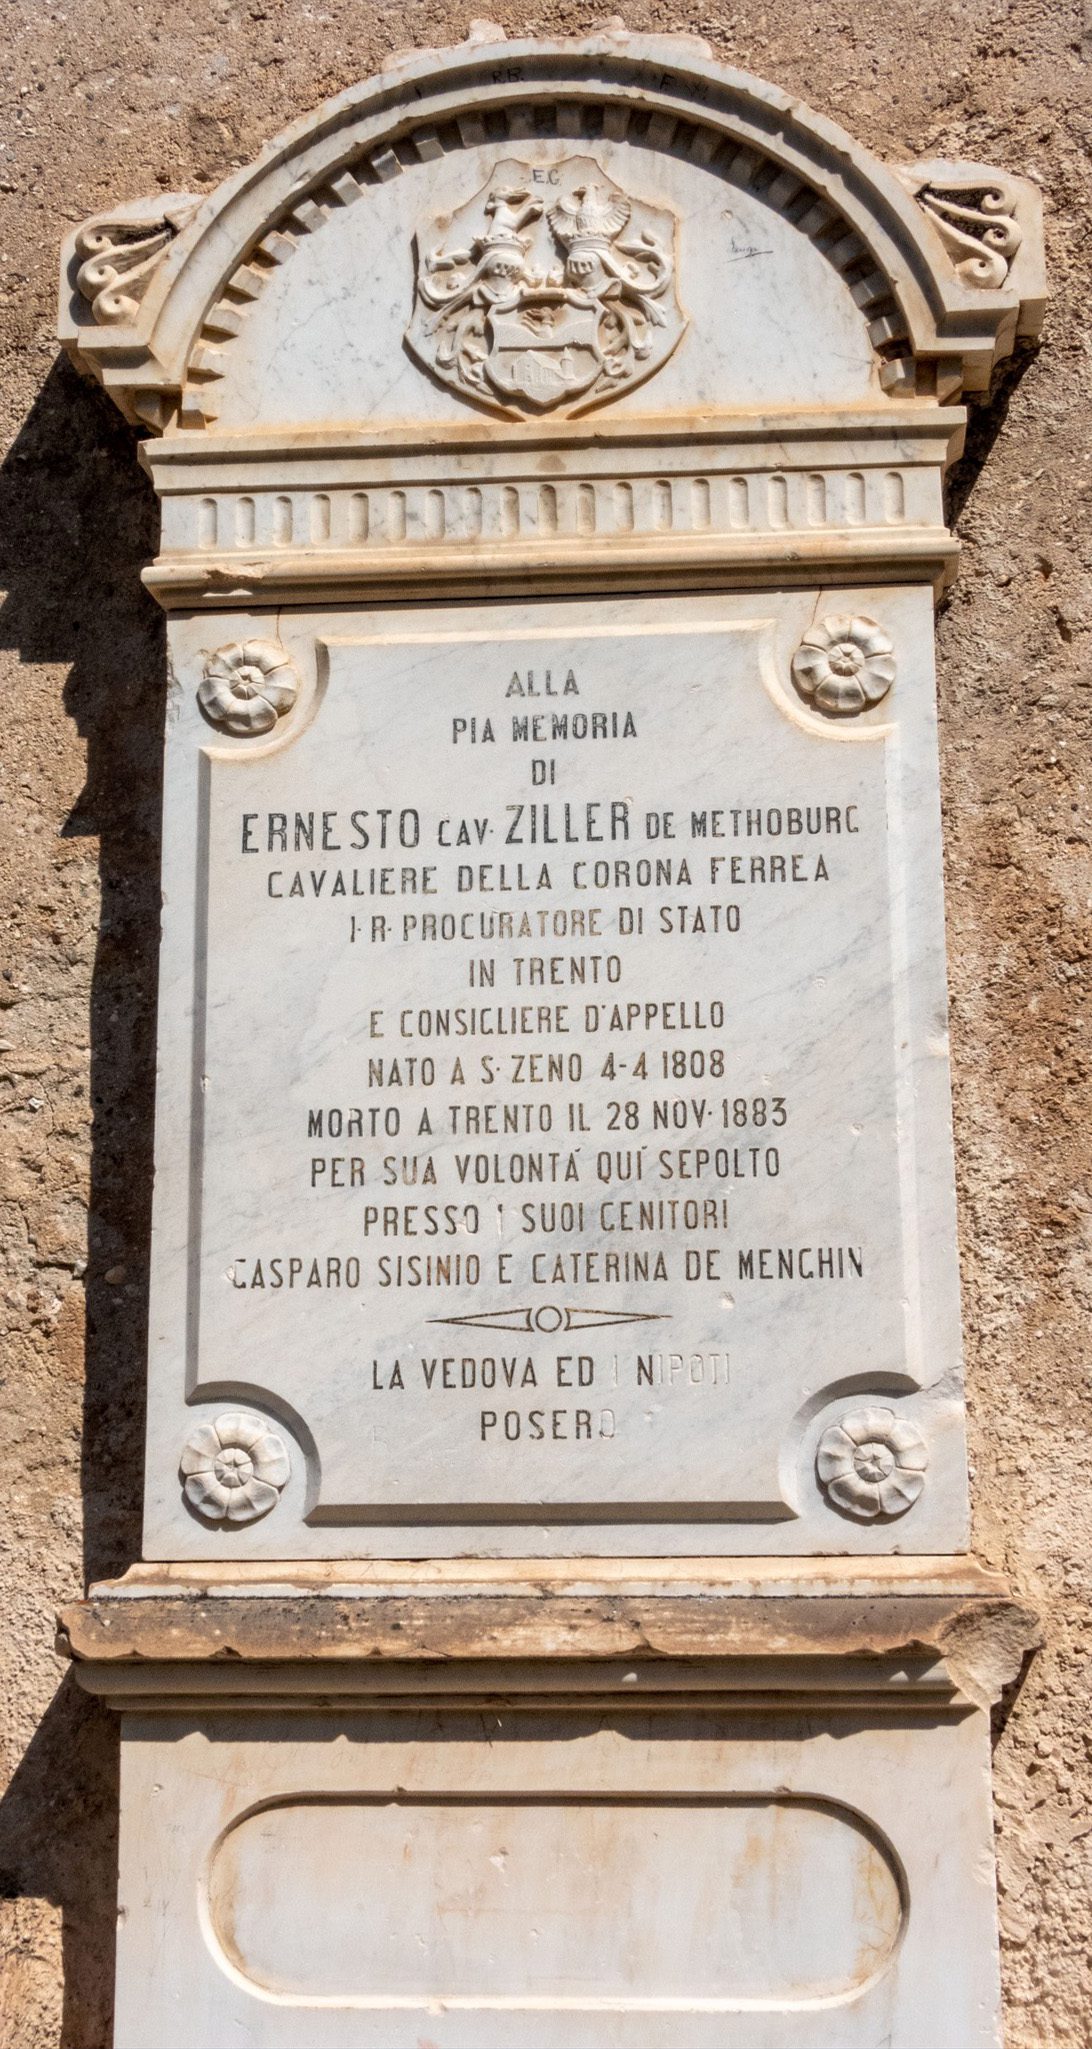 Photo of commemorative stone in Sanzeno for Ernesto Ziller di Methoburg, taken in 2022 by Dr Ferdinand Manfred Ziller. Used with permission.